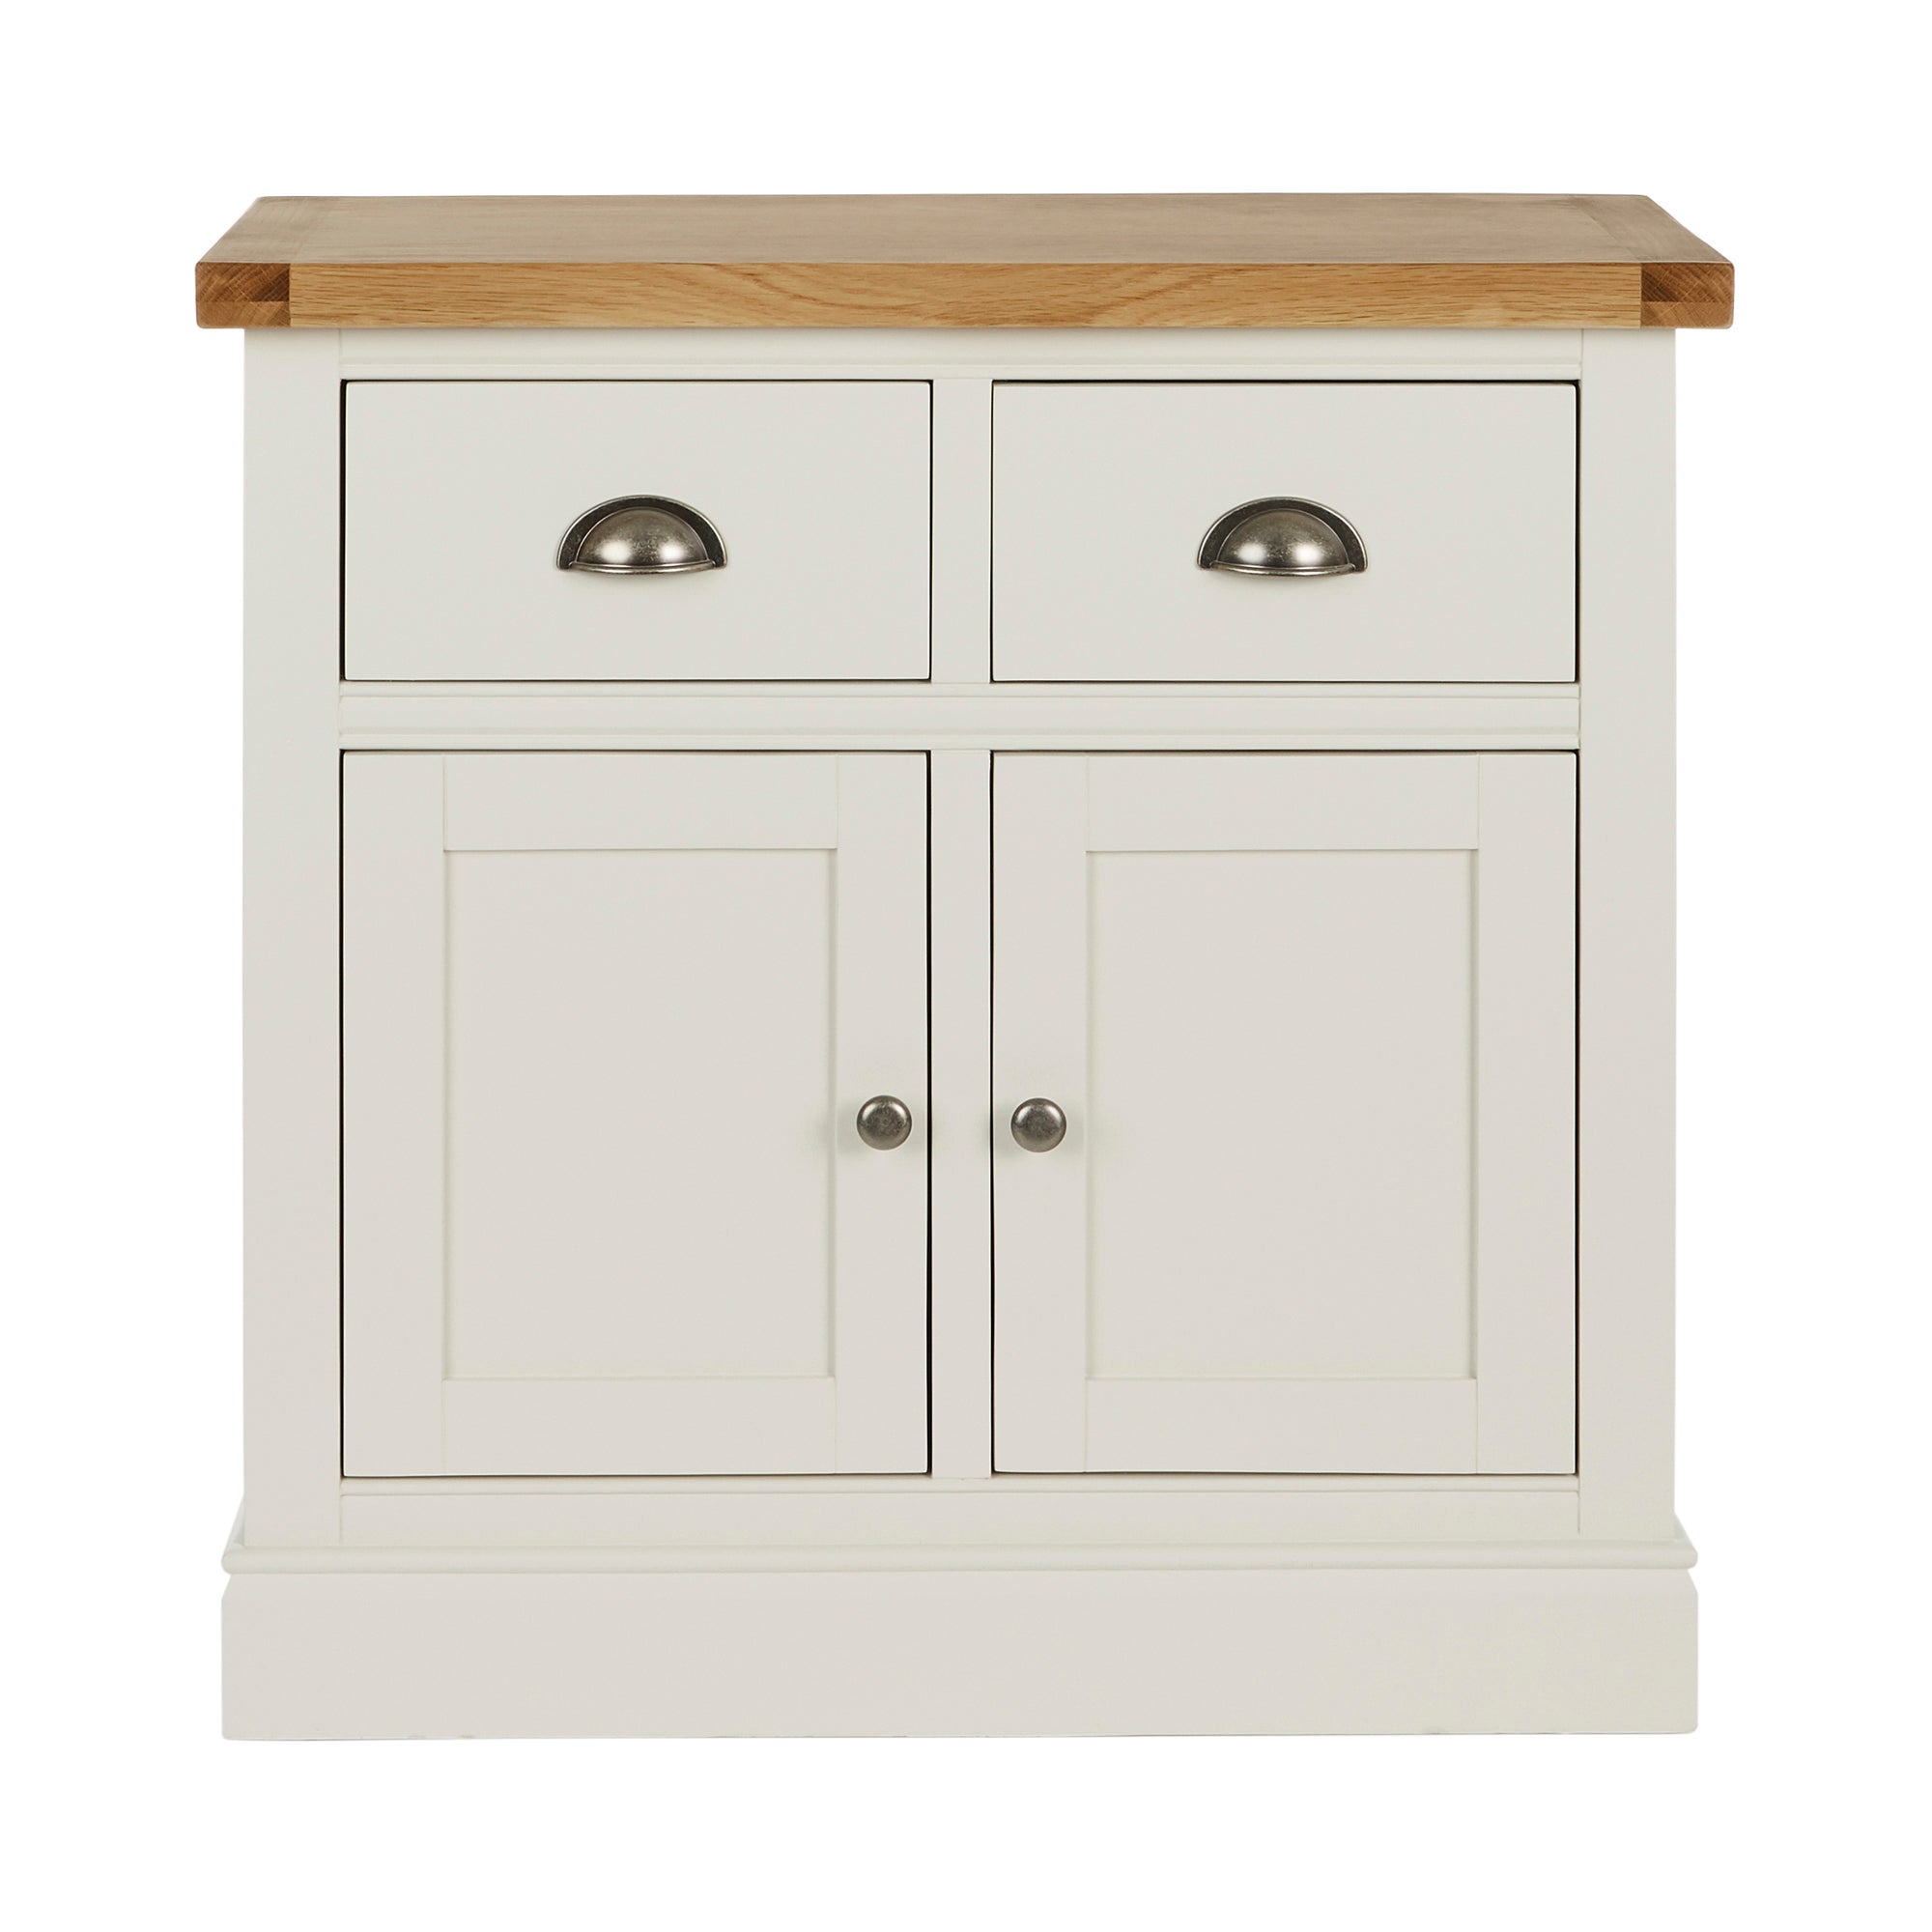 Compton Small Sideboard, Ivory